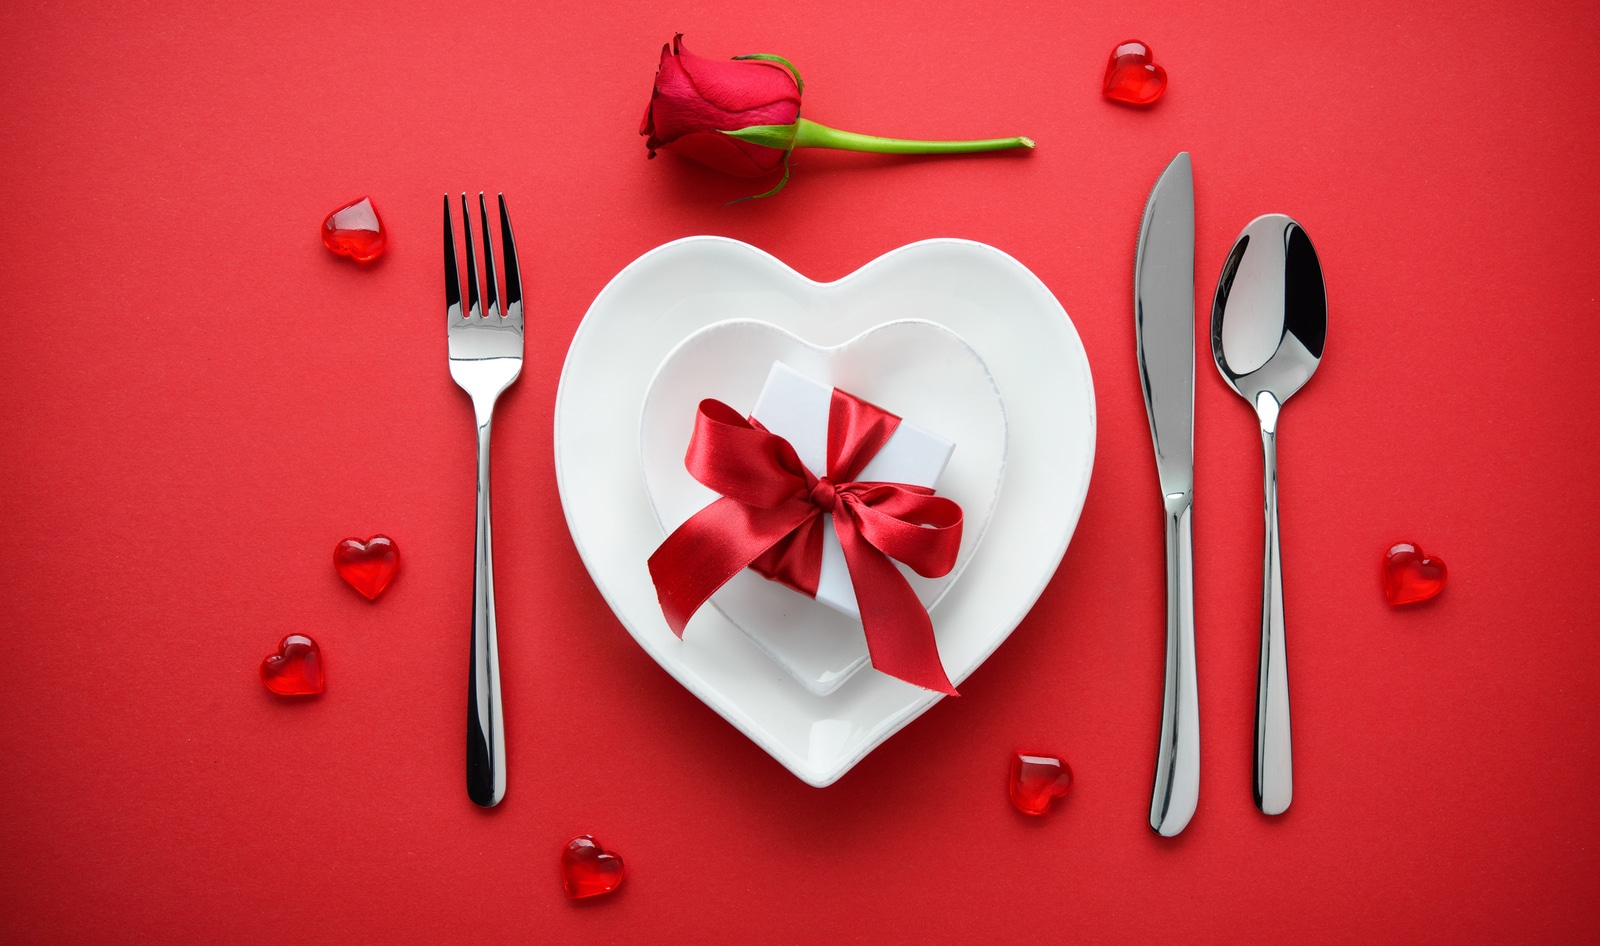 11 Vegan Restaurant Menus to Get in the Mood for Valentine’s Day